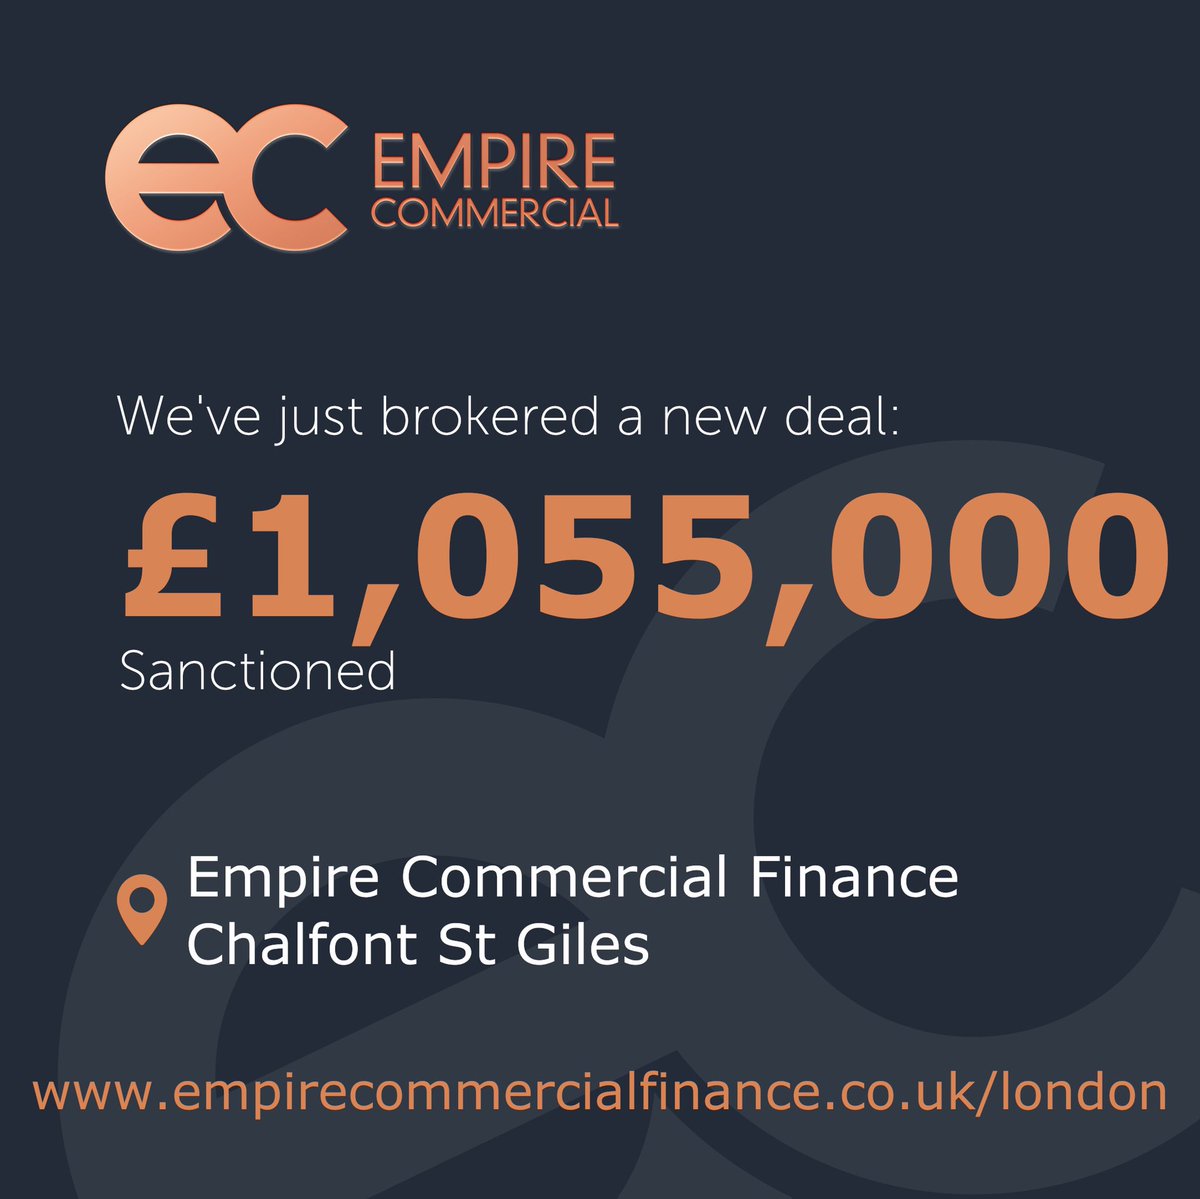 nice to get this #residentialinvestment deal over the line for our client #propertyinvestment #propertyfinance  #commercialfinance #landlord #investor #propertyinvestor #buytolet